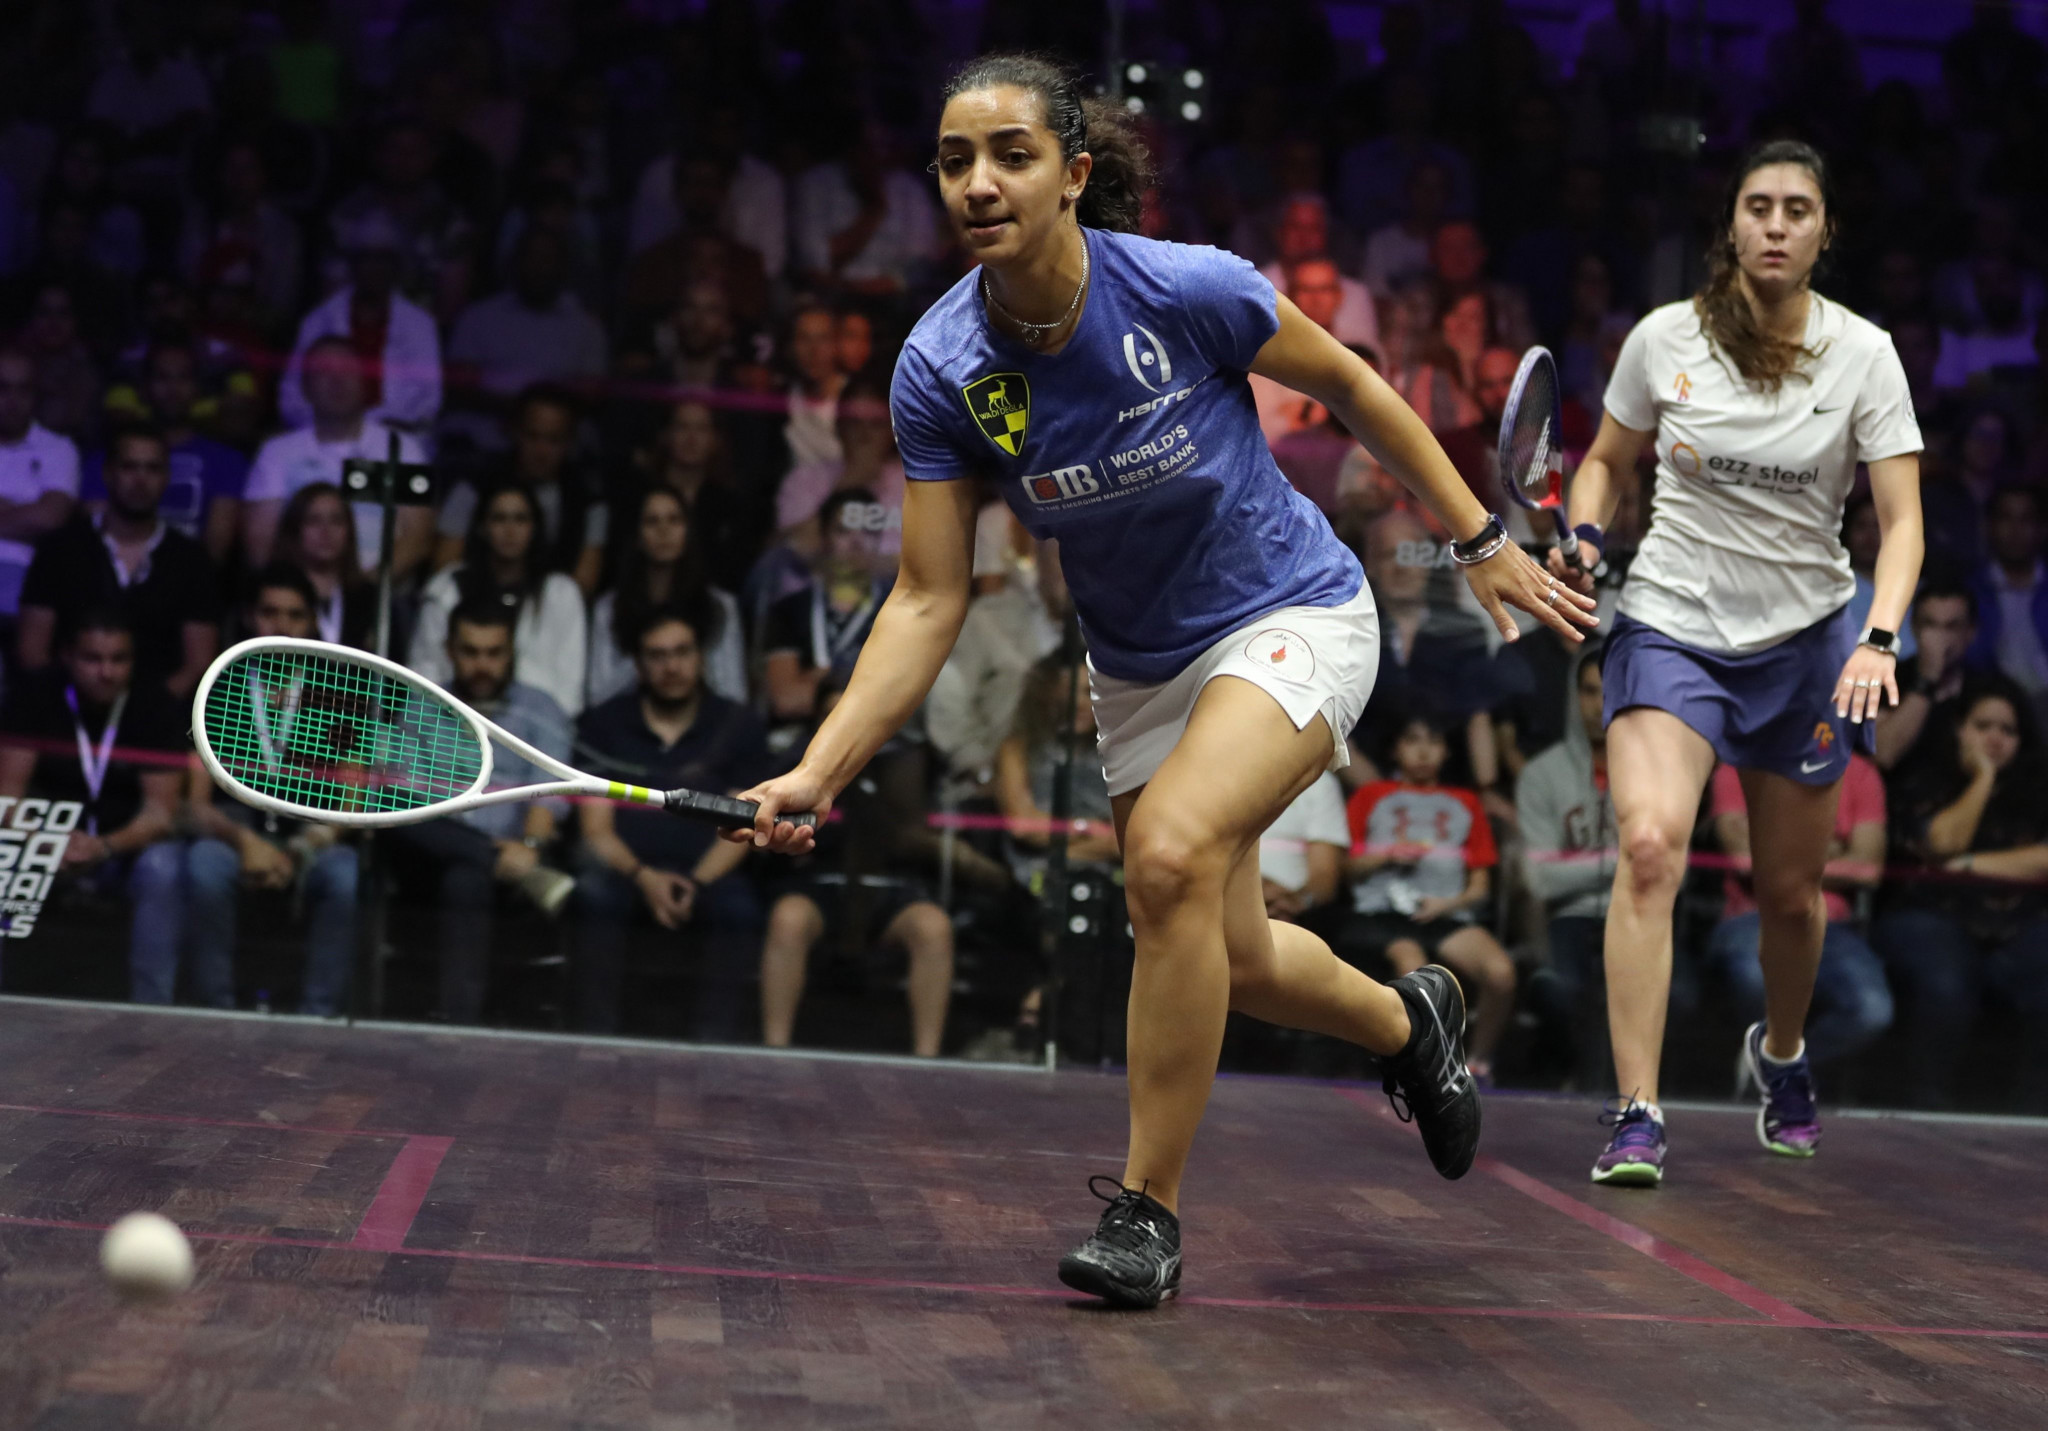 El Welily and Elshorbagy among winners as seeds dominate day four at PSA Tournament of Champions